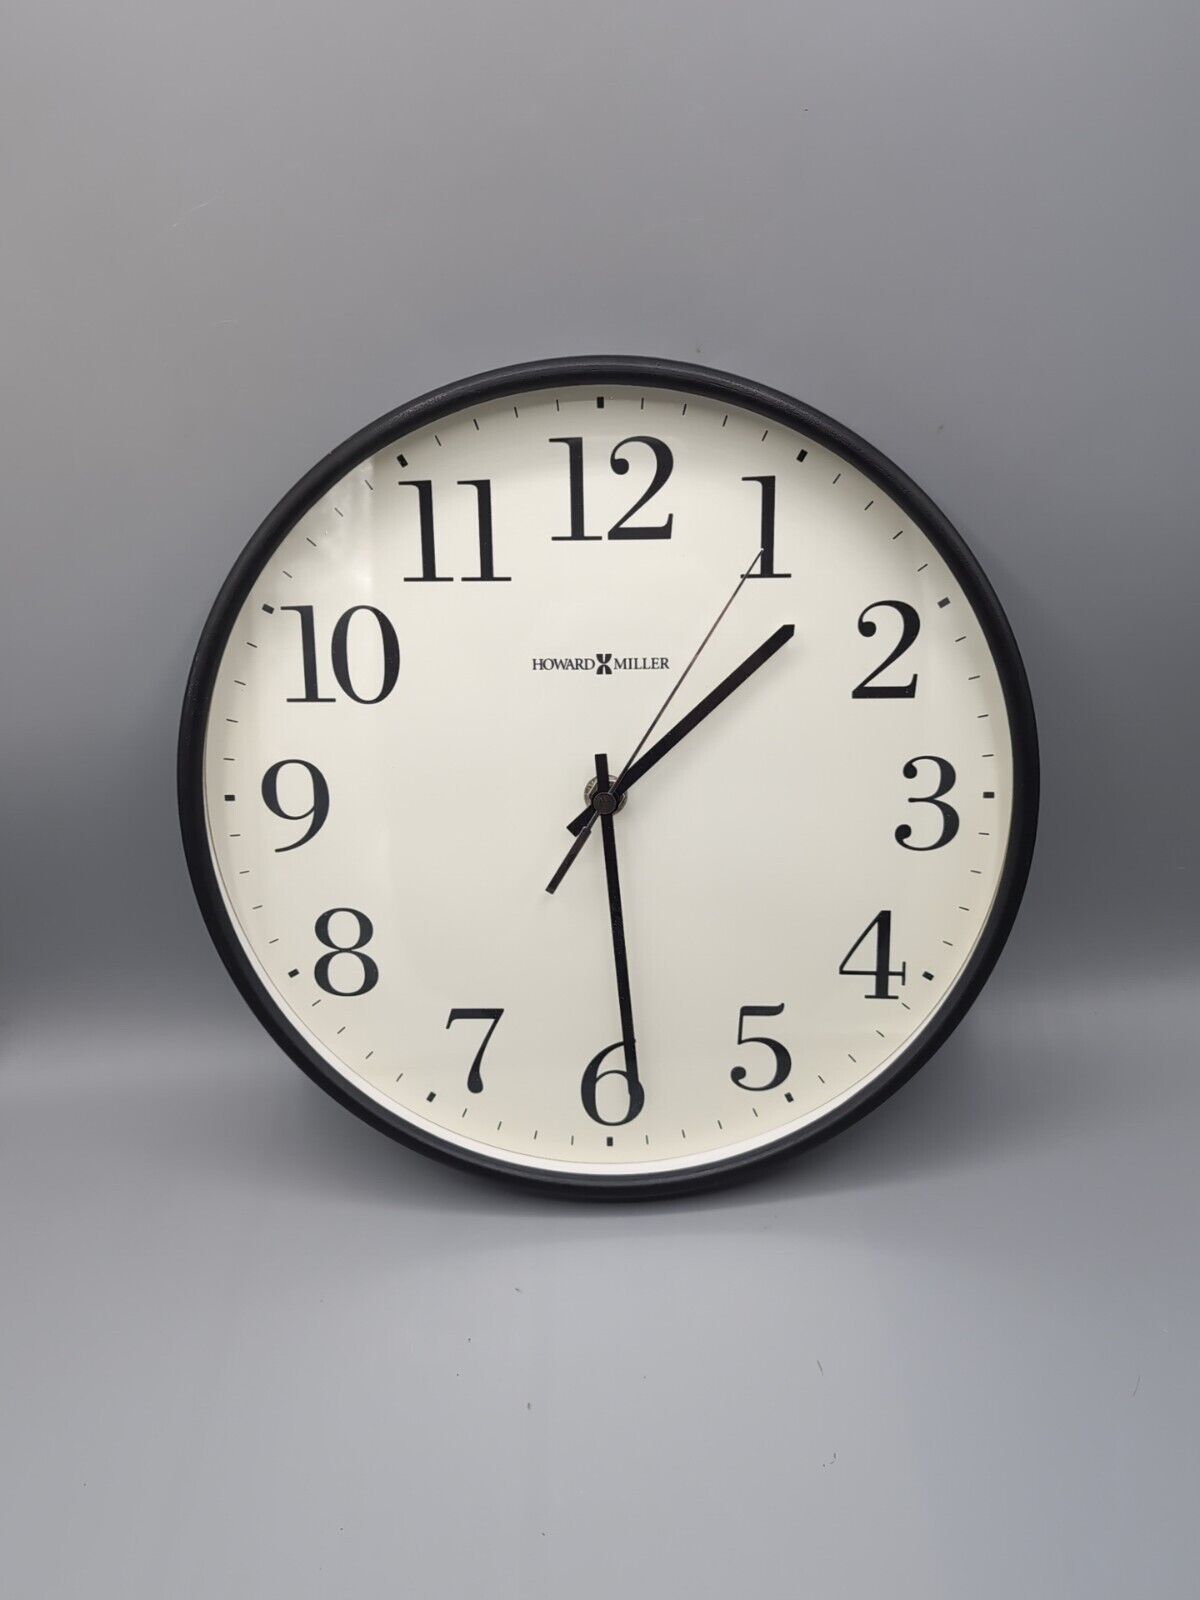 Howard Miller Office Mate Wall Clock 625-254 – 10.5-Inch Black Injection-Molded 